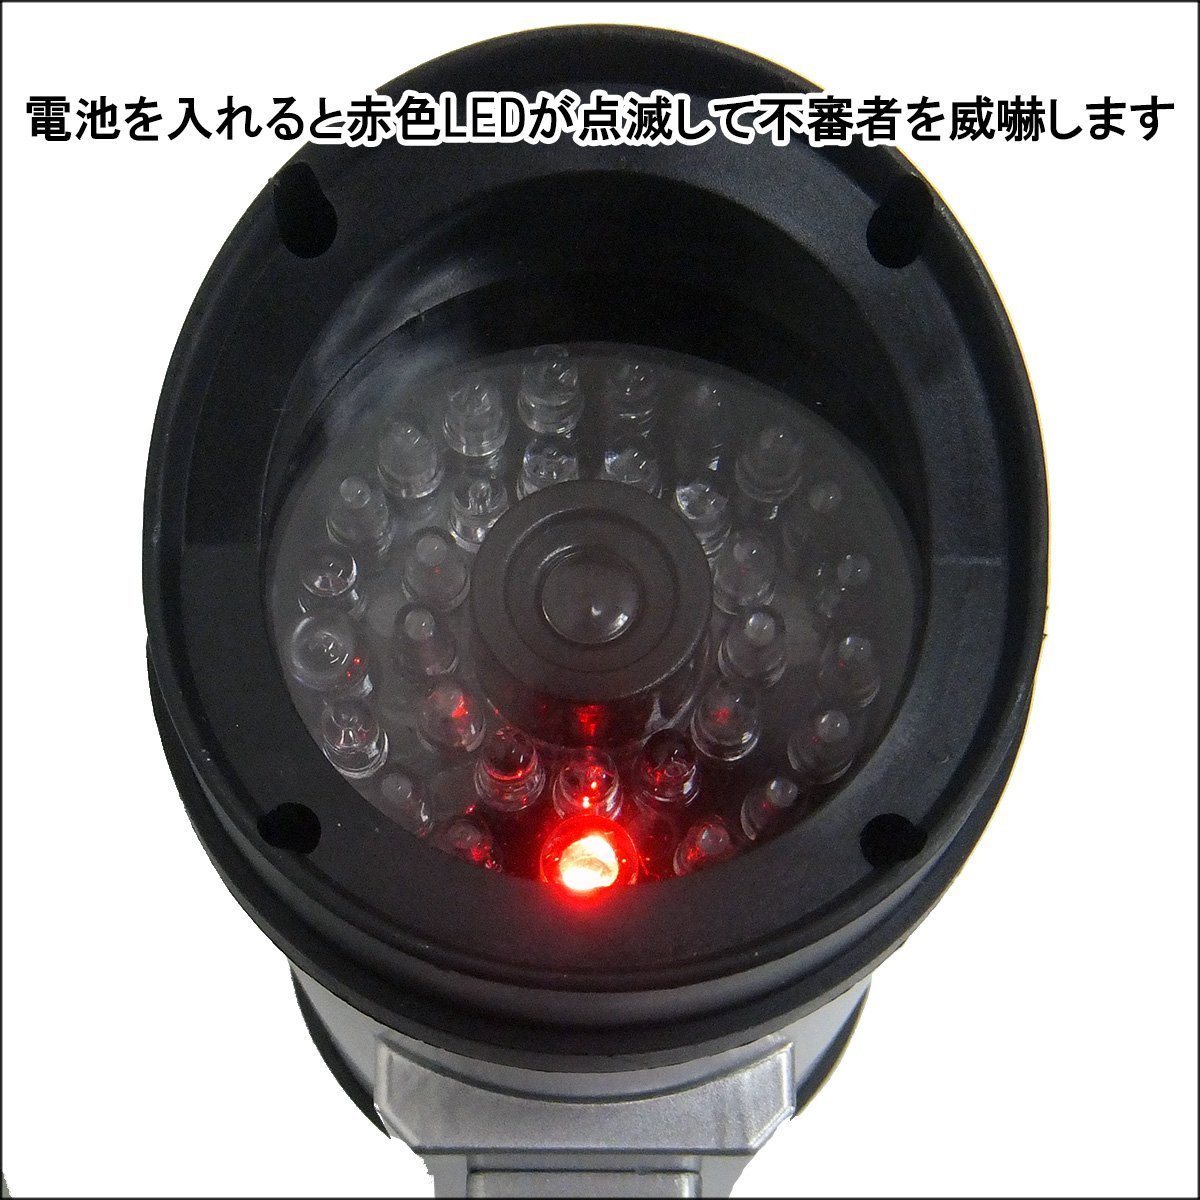  dummy security camera fake equipment red LED blinking IR camera type dummy camera (Ⅱ) crime prevention sticker 2 kind attaching /22